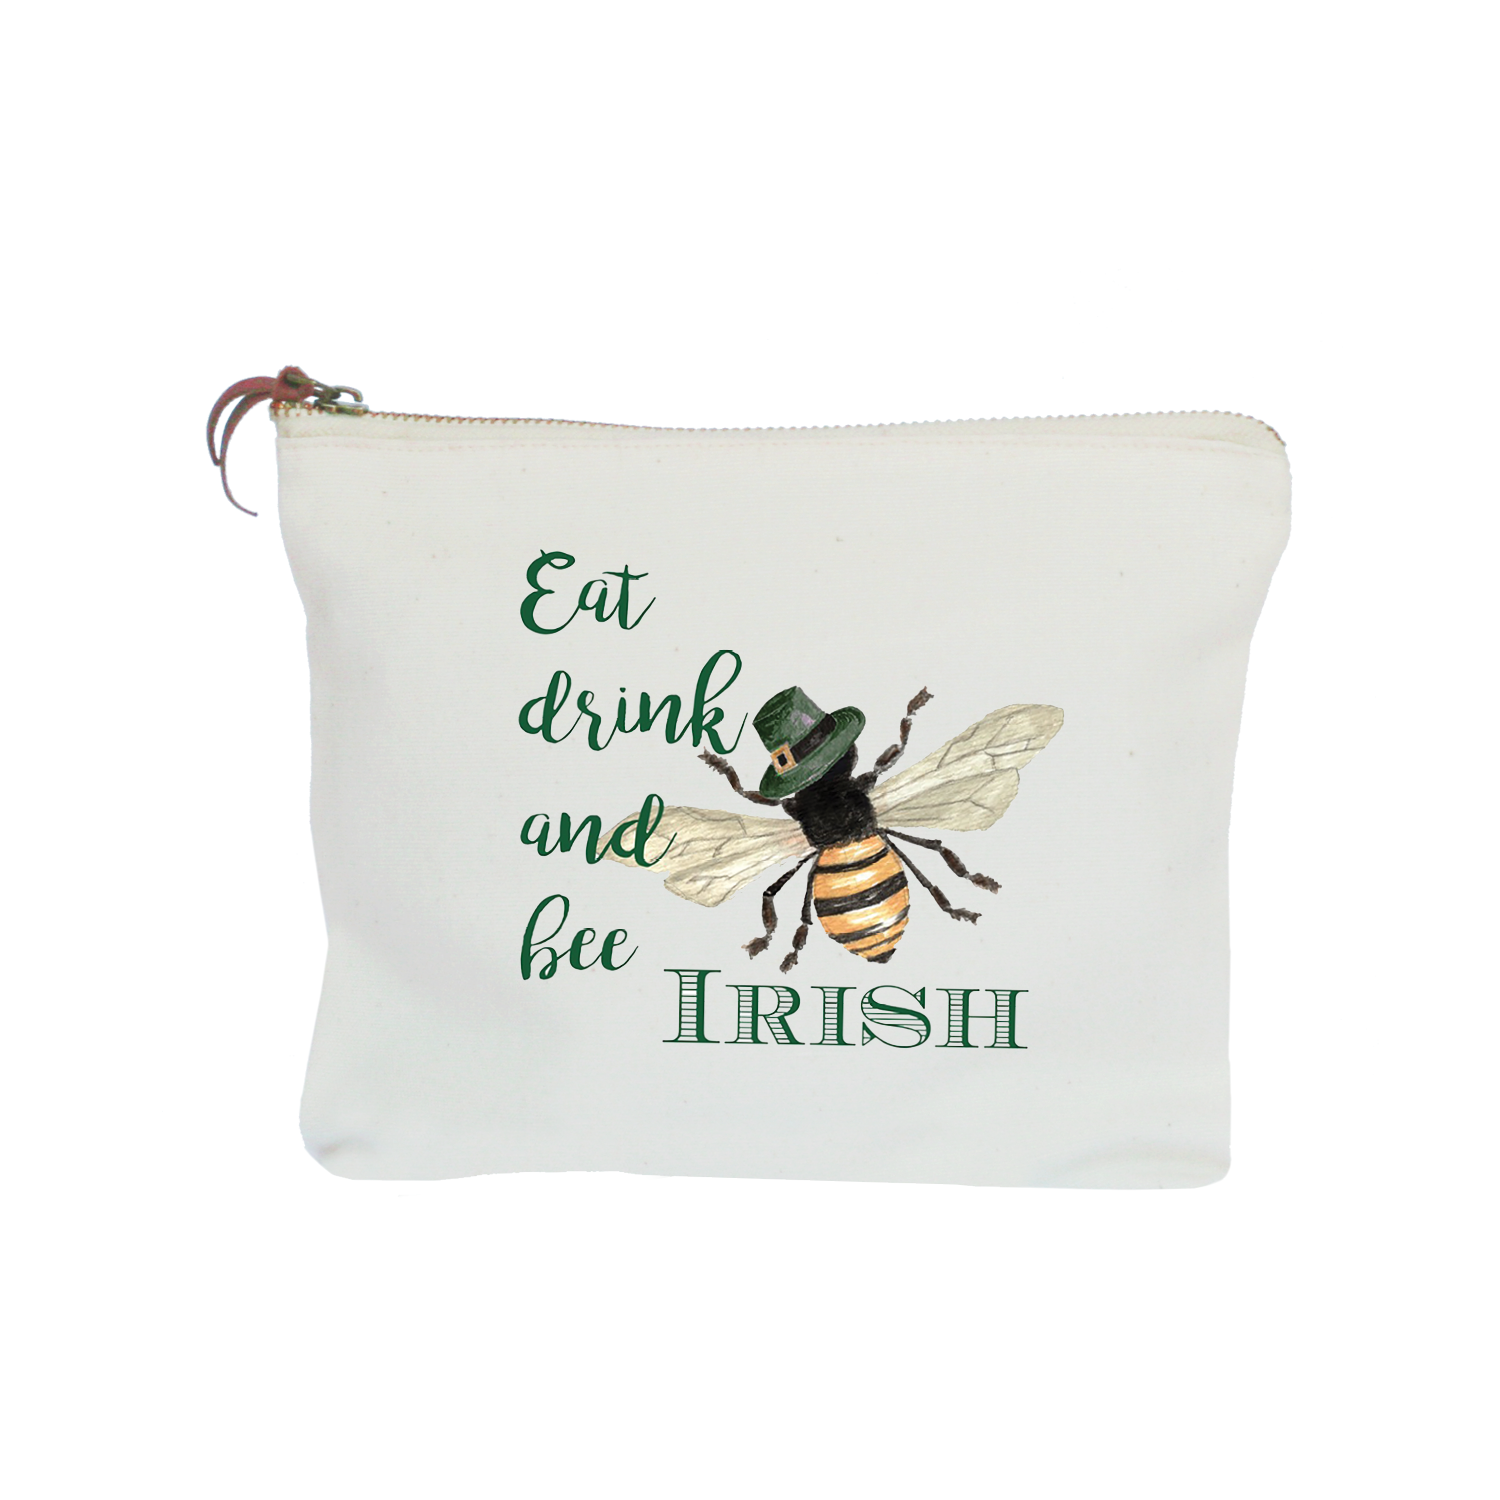 eat drink and bee irish zipper pouch